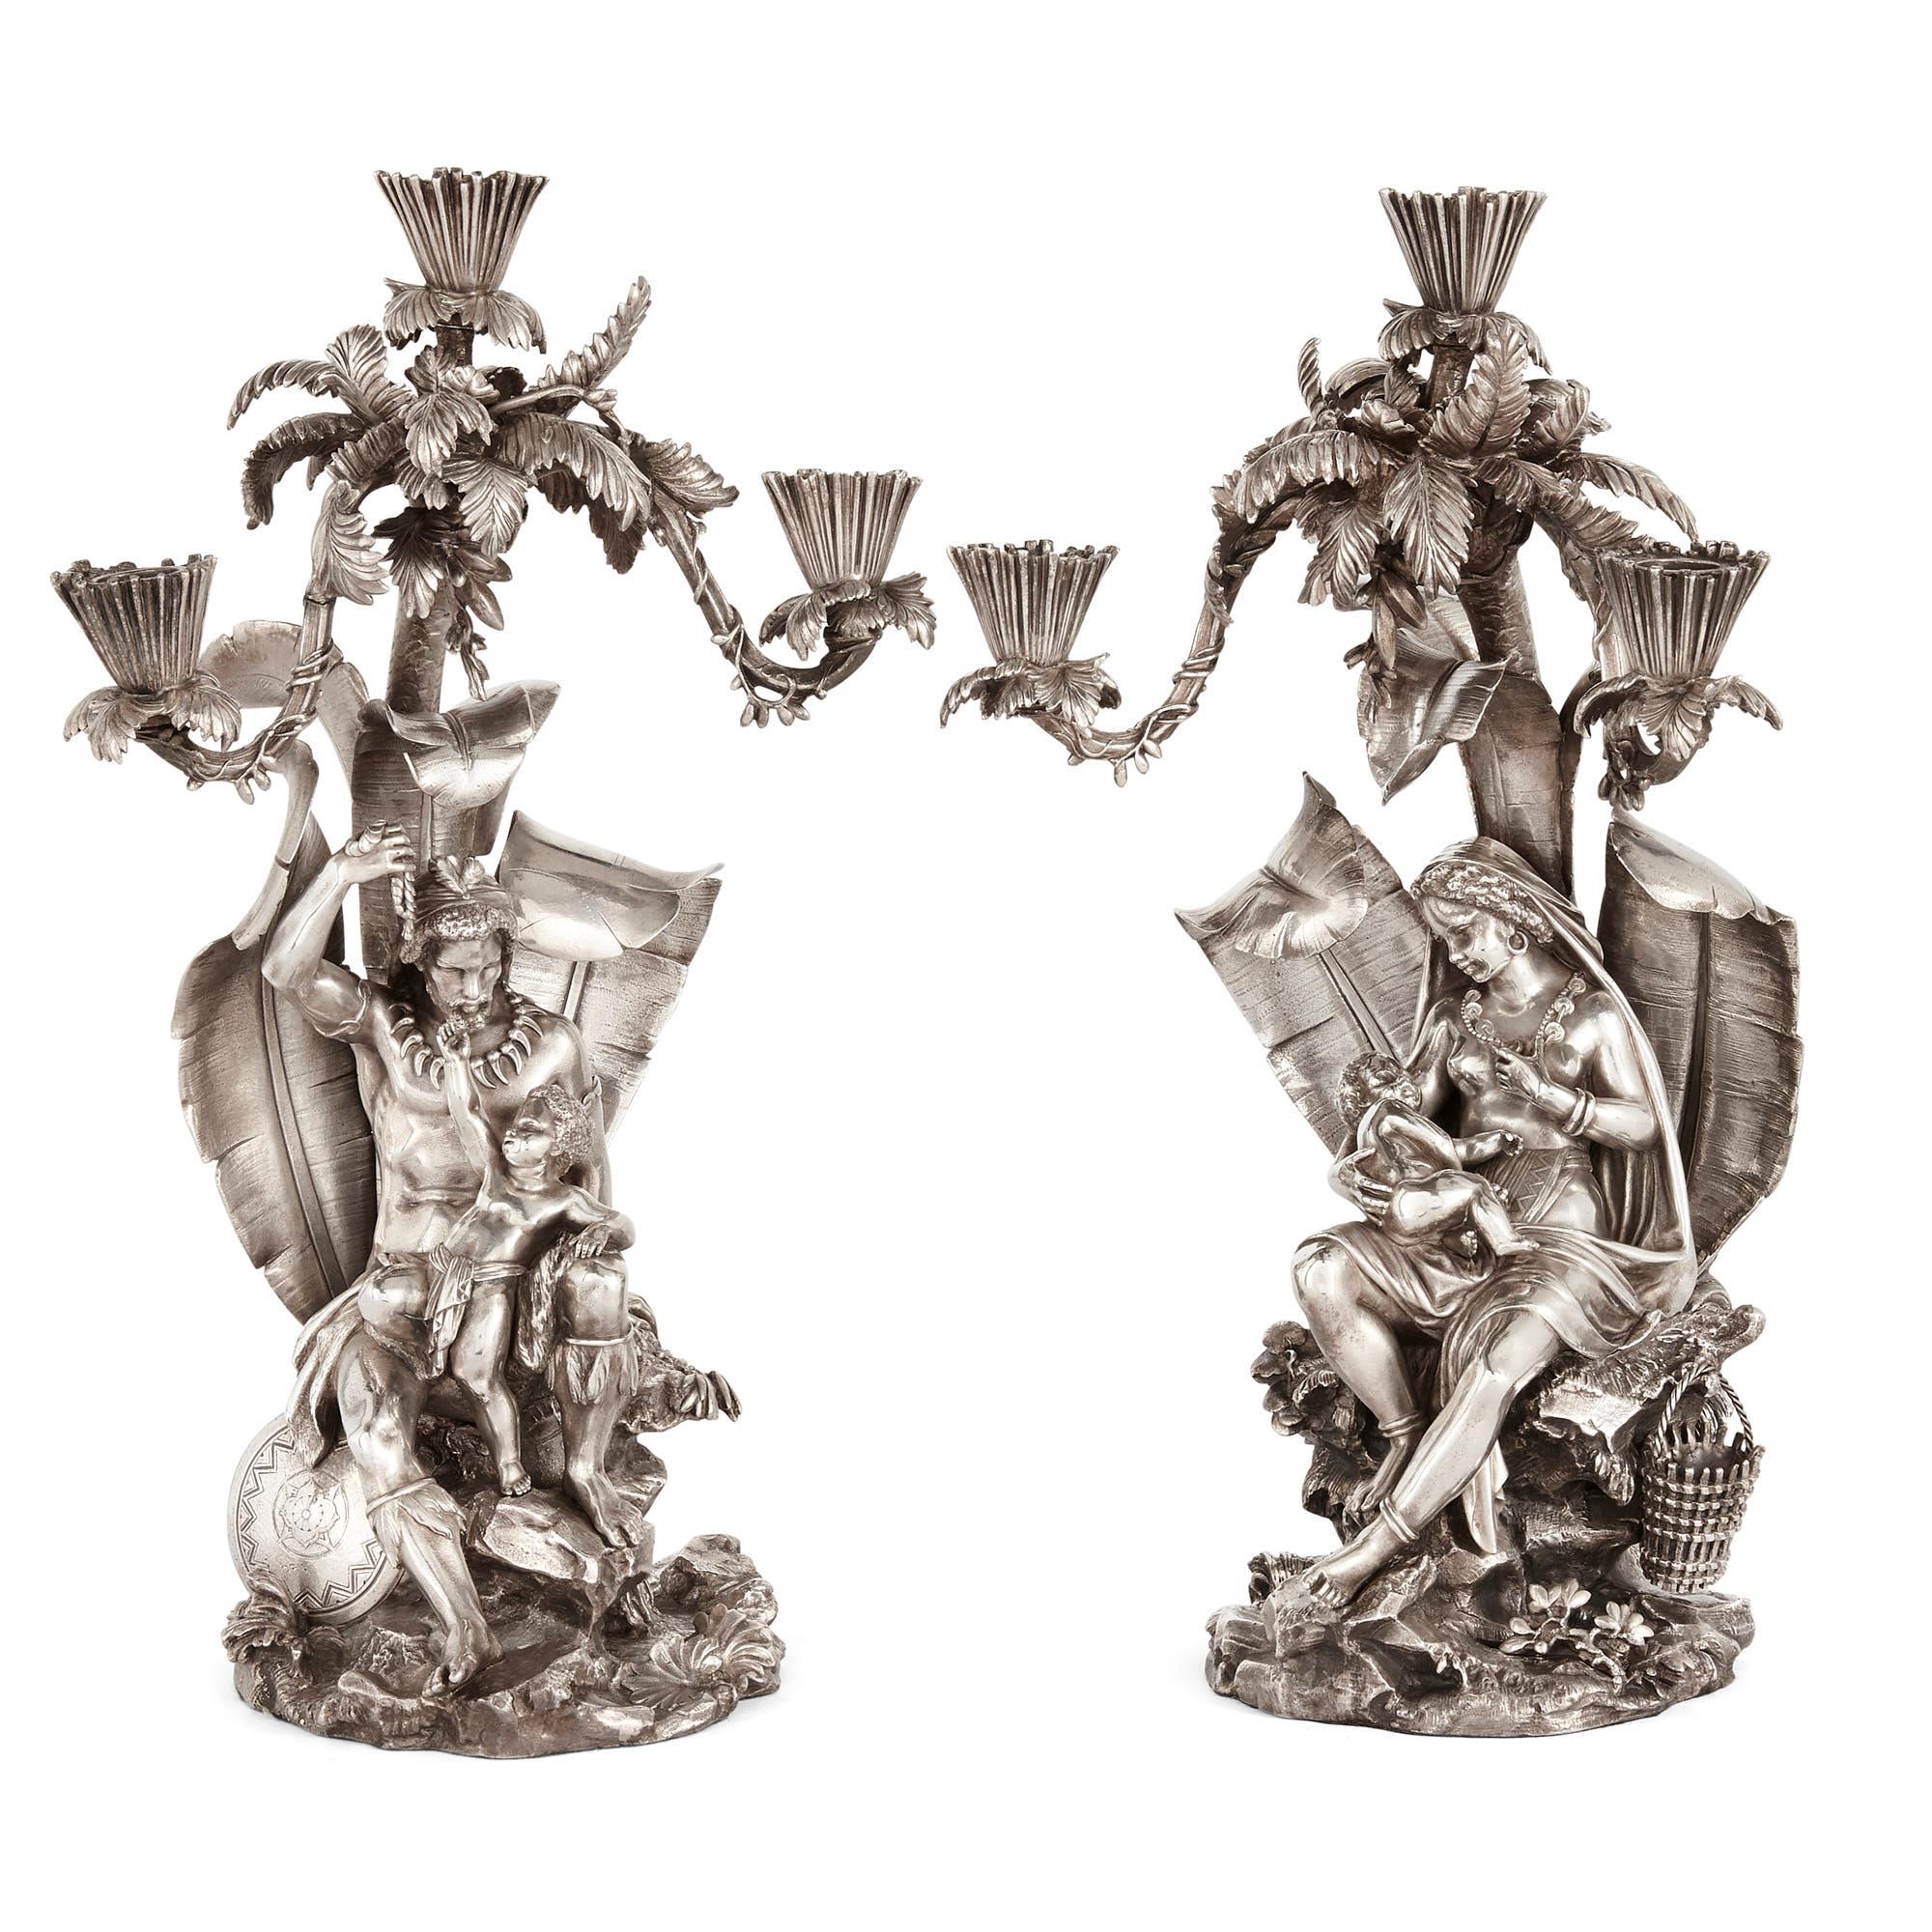 Pair of figural candelabra by Elkington, Mason & Co
English, circa 1860
Height 44cm, width 26cm, depth 20cm 

This pair of three light figural candelabra is made of silvered-bronze. The candelabra take the form of a male and female figure in